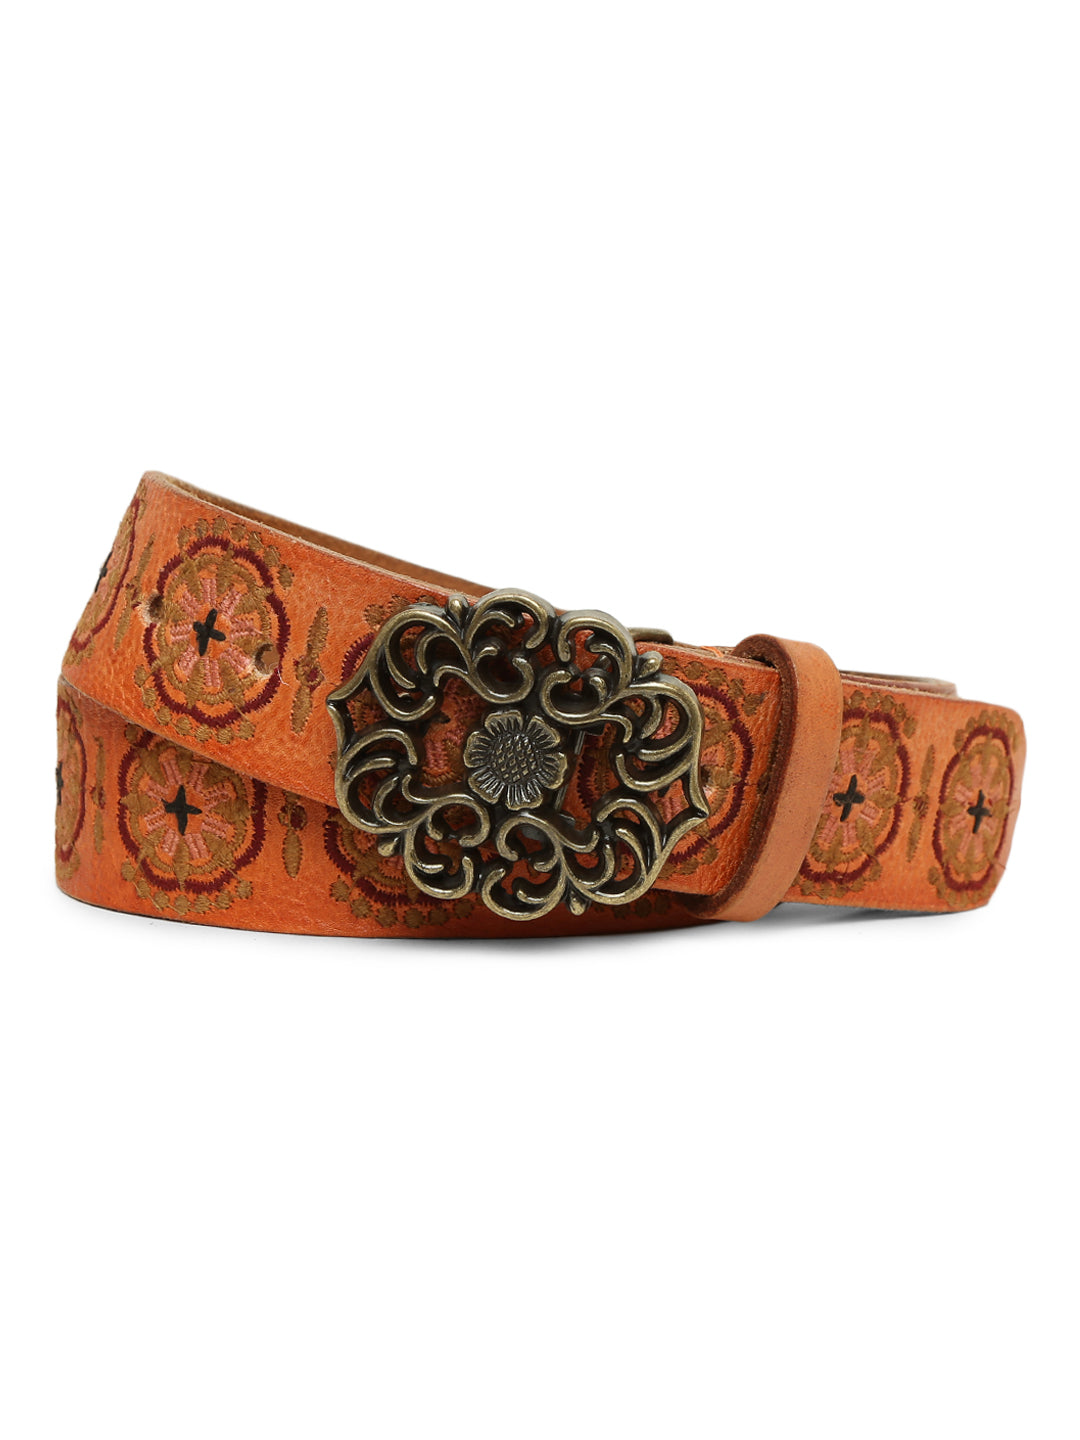 Genuine Leather Tan Color Printed Hand-tooled Belt